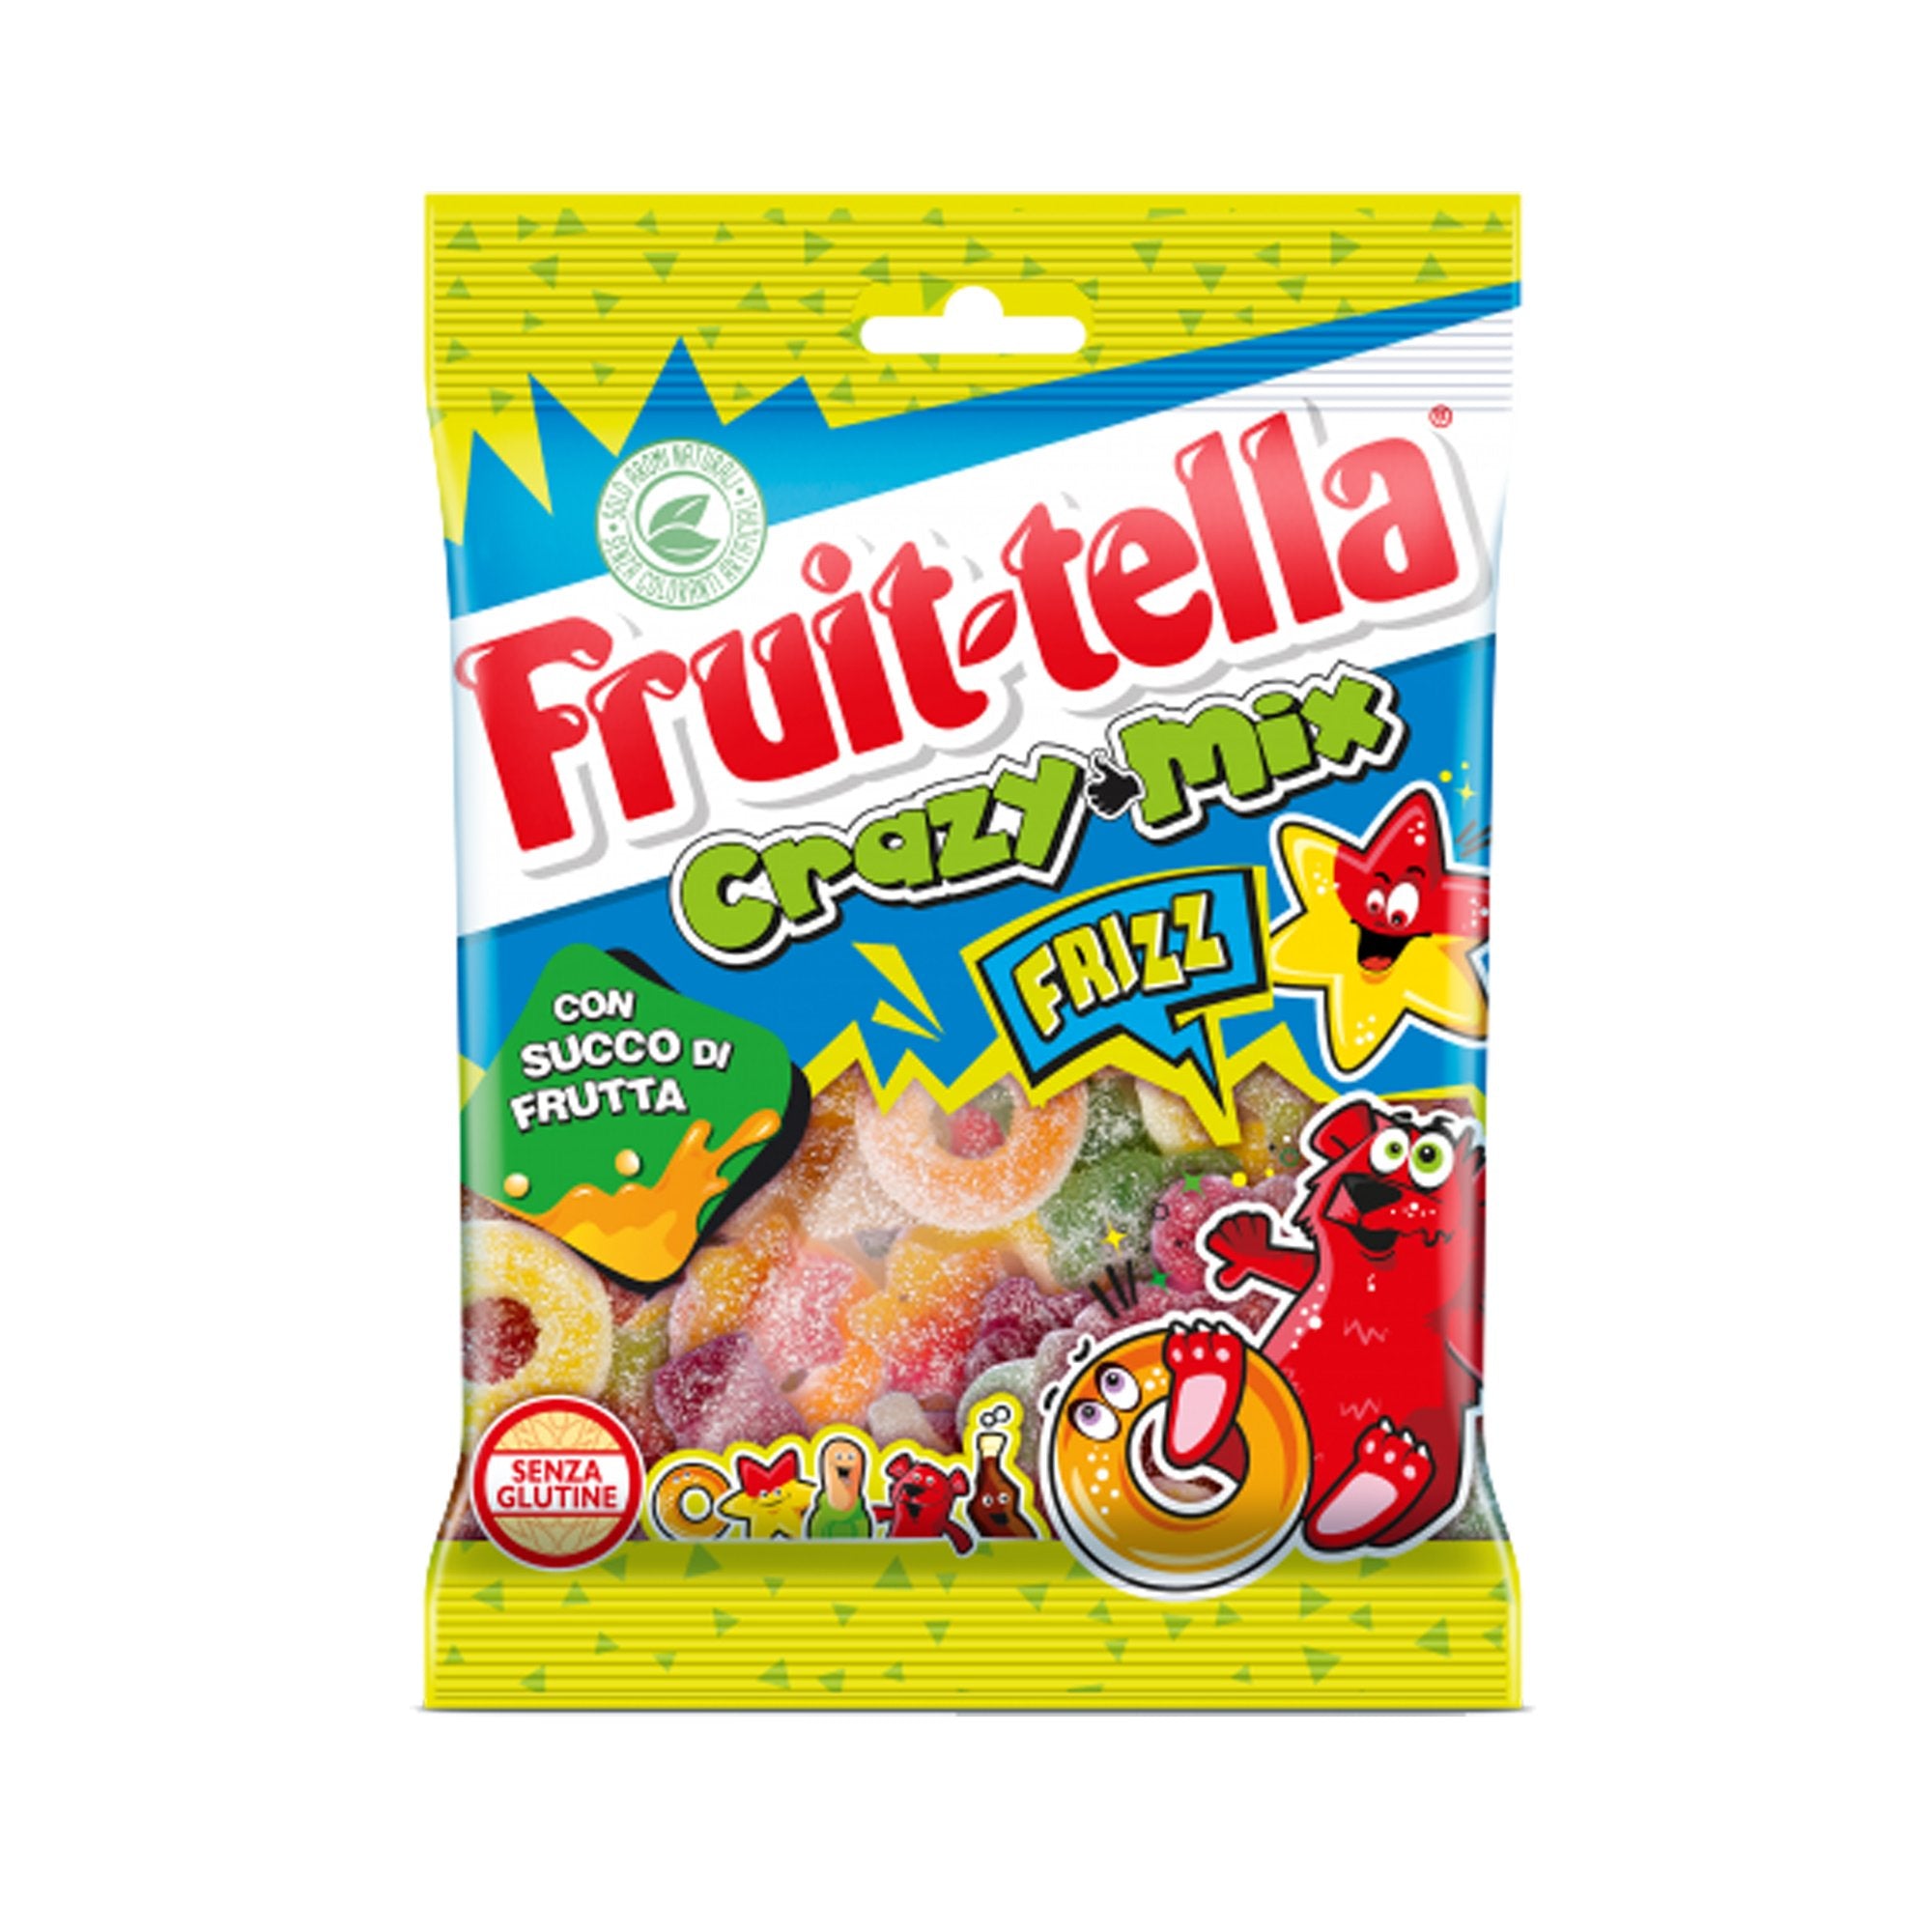 fruit-tella-caramelle-gommose-frit-tella-crazy-mix-frizz-f-to-175gr